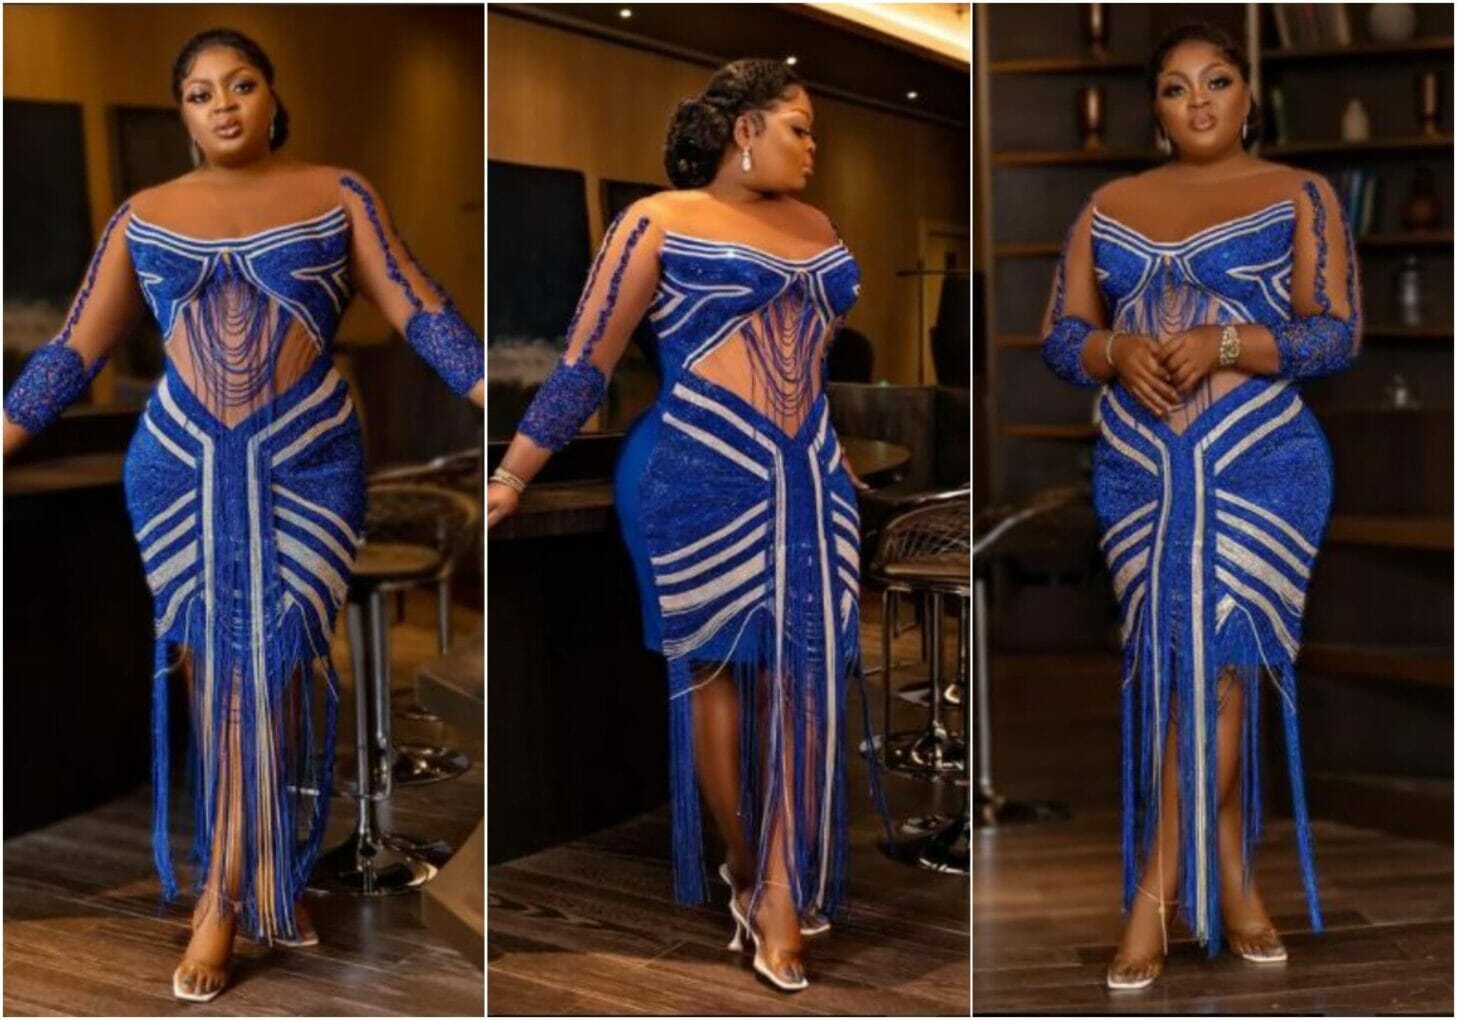 Eniola Badmus continues to tension fans with photos of her new body